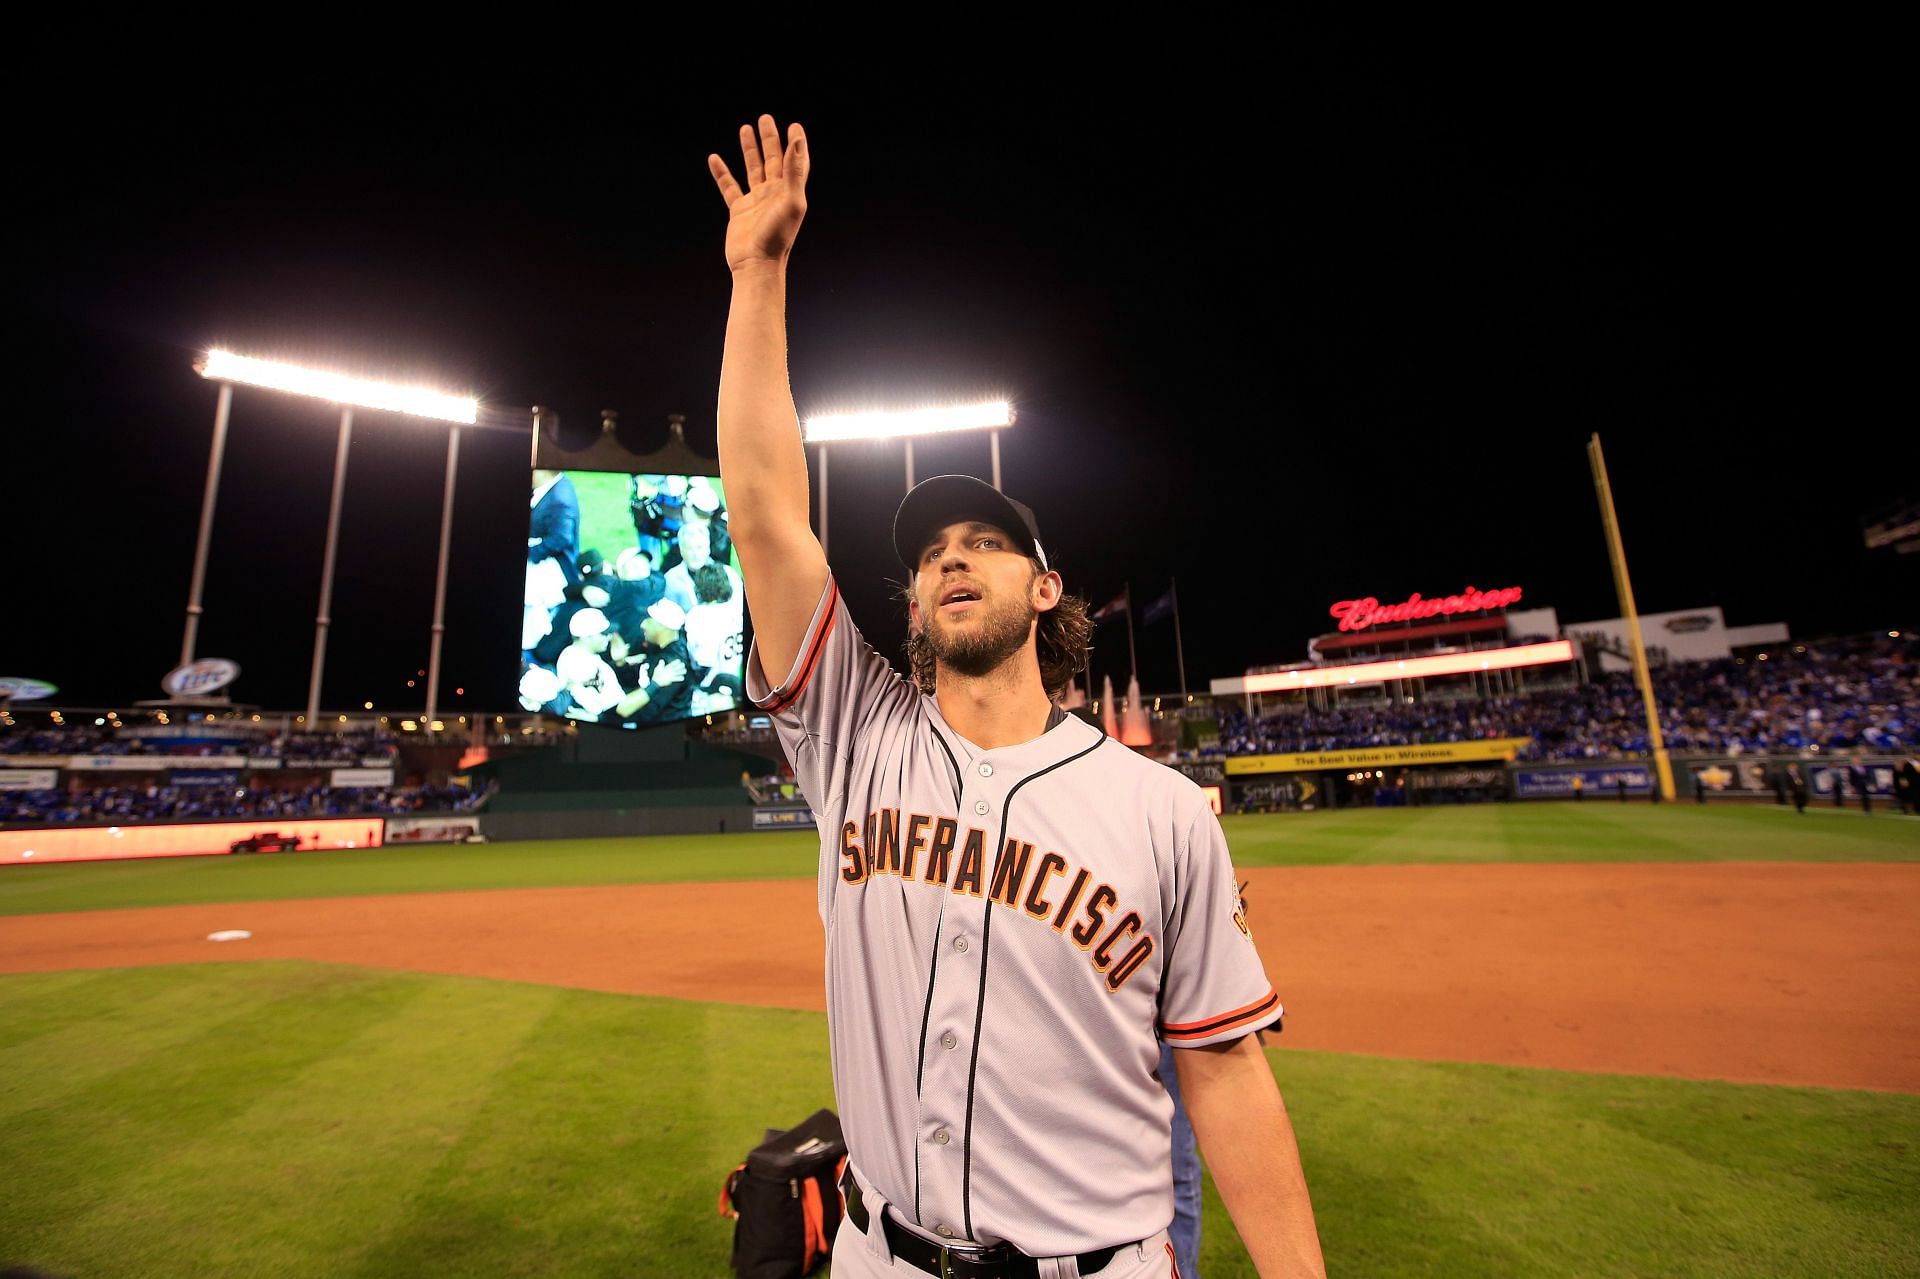 Along with Buster Posey, Madison Bumgarner was the face of the Giants in MLB during the 2010s